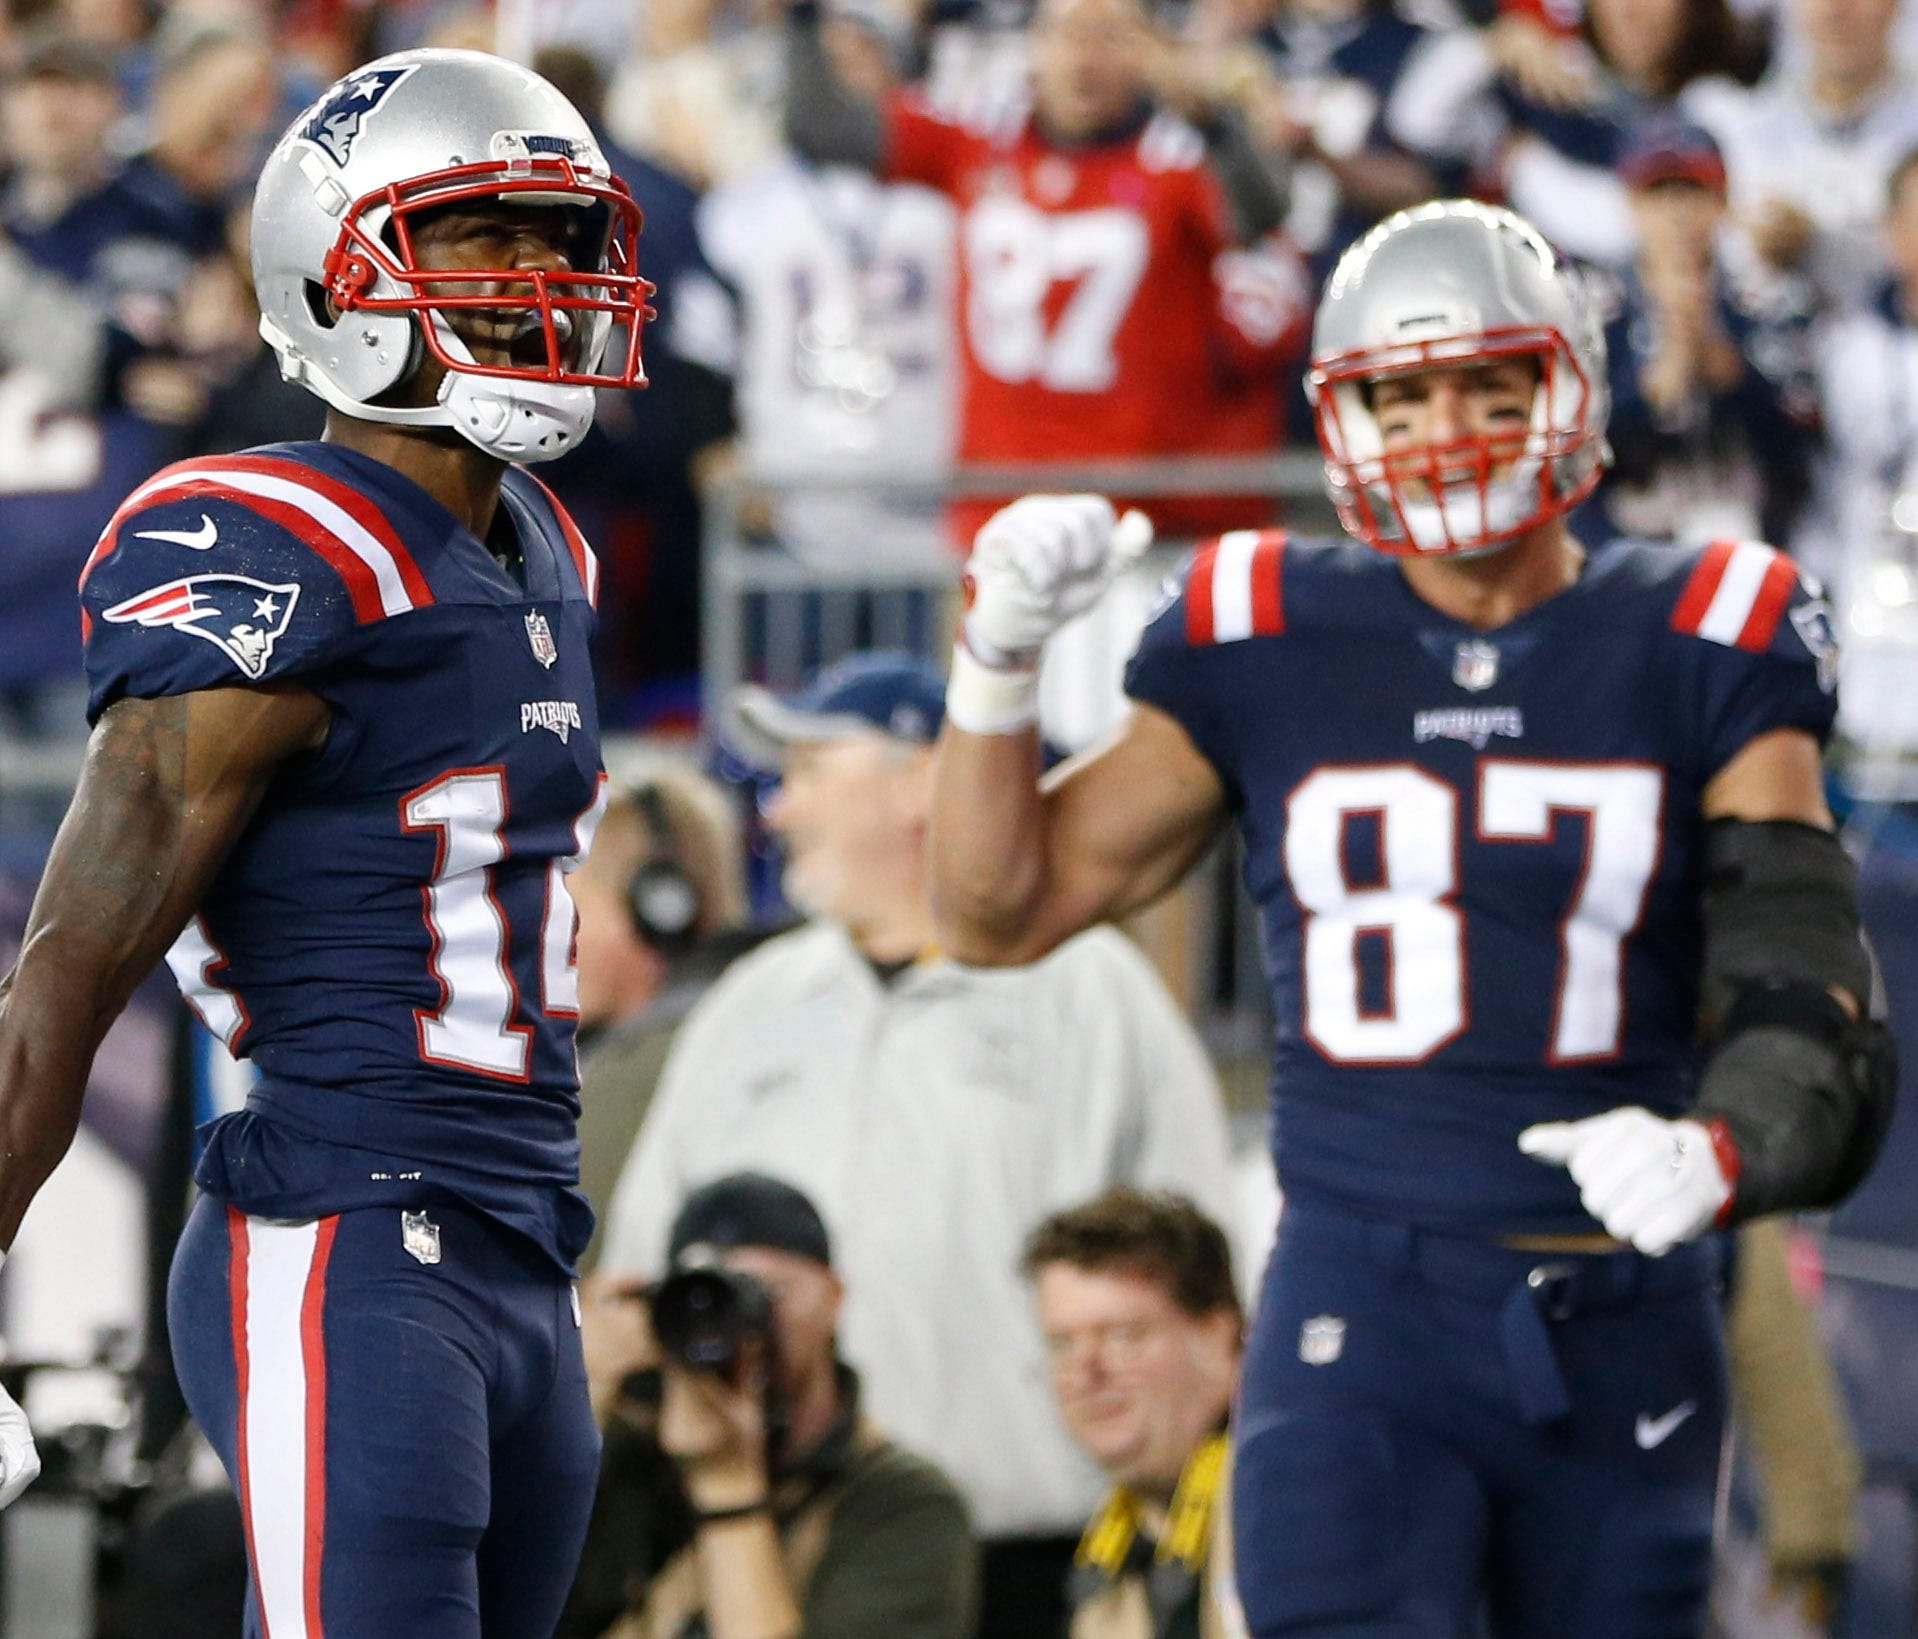 New England Patriots wide receiver Brandin Cooks (14) and tight end Rob Gronkowski (87) celebrate after scoring a touchdown during the first half against the Atlanta Falcons at Gillette Stadium.